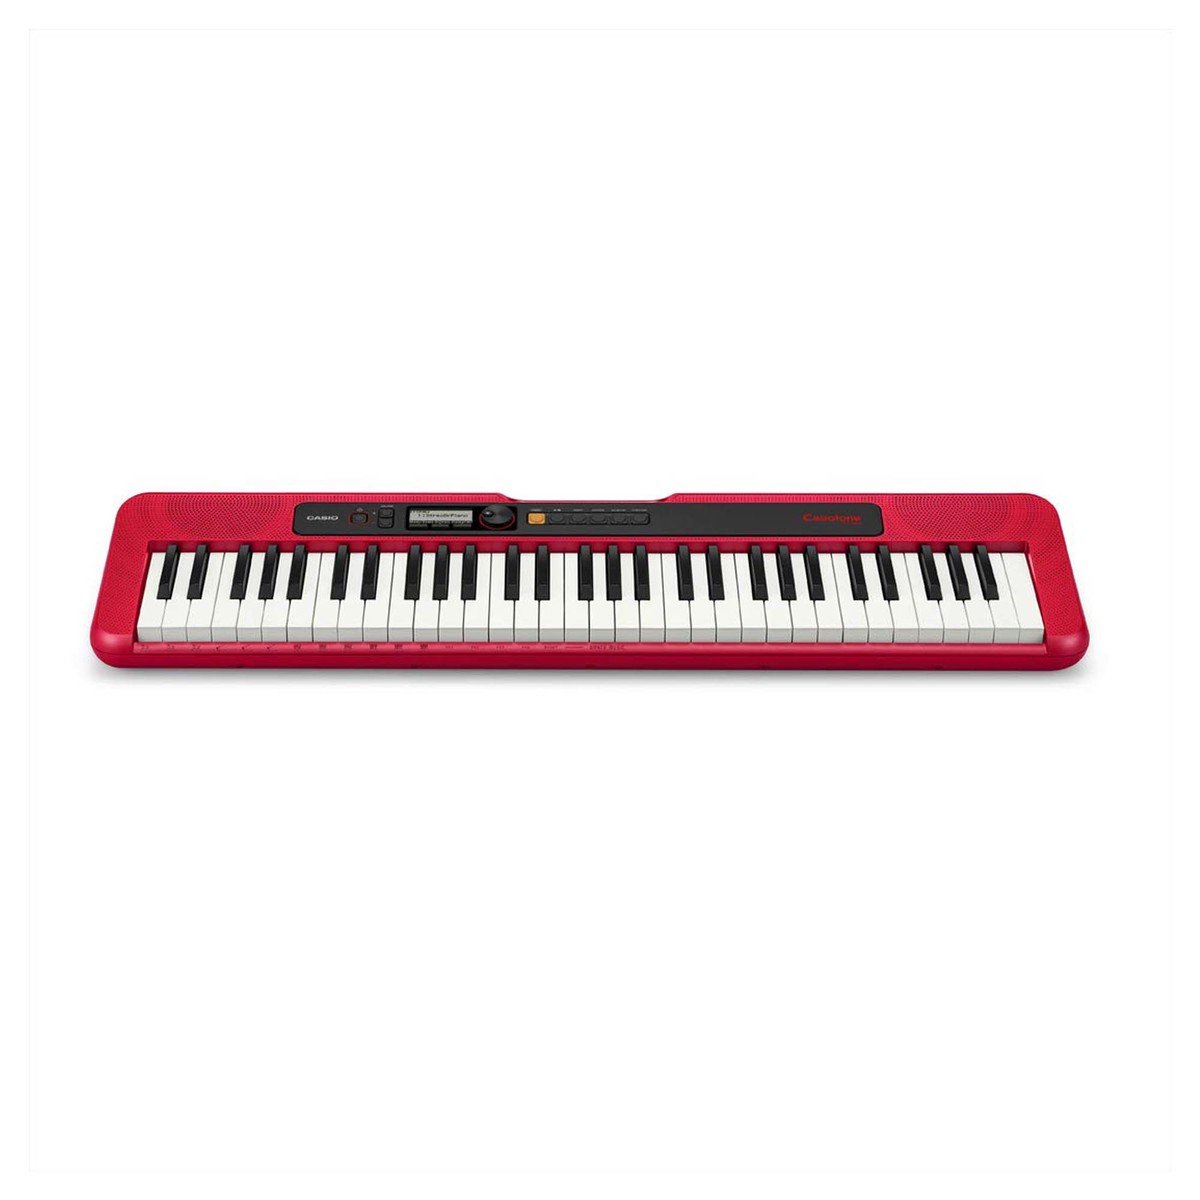 Casio Keyboard CTS-200 Red